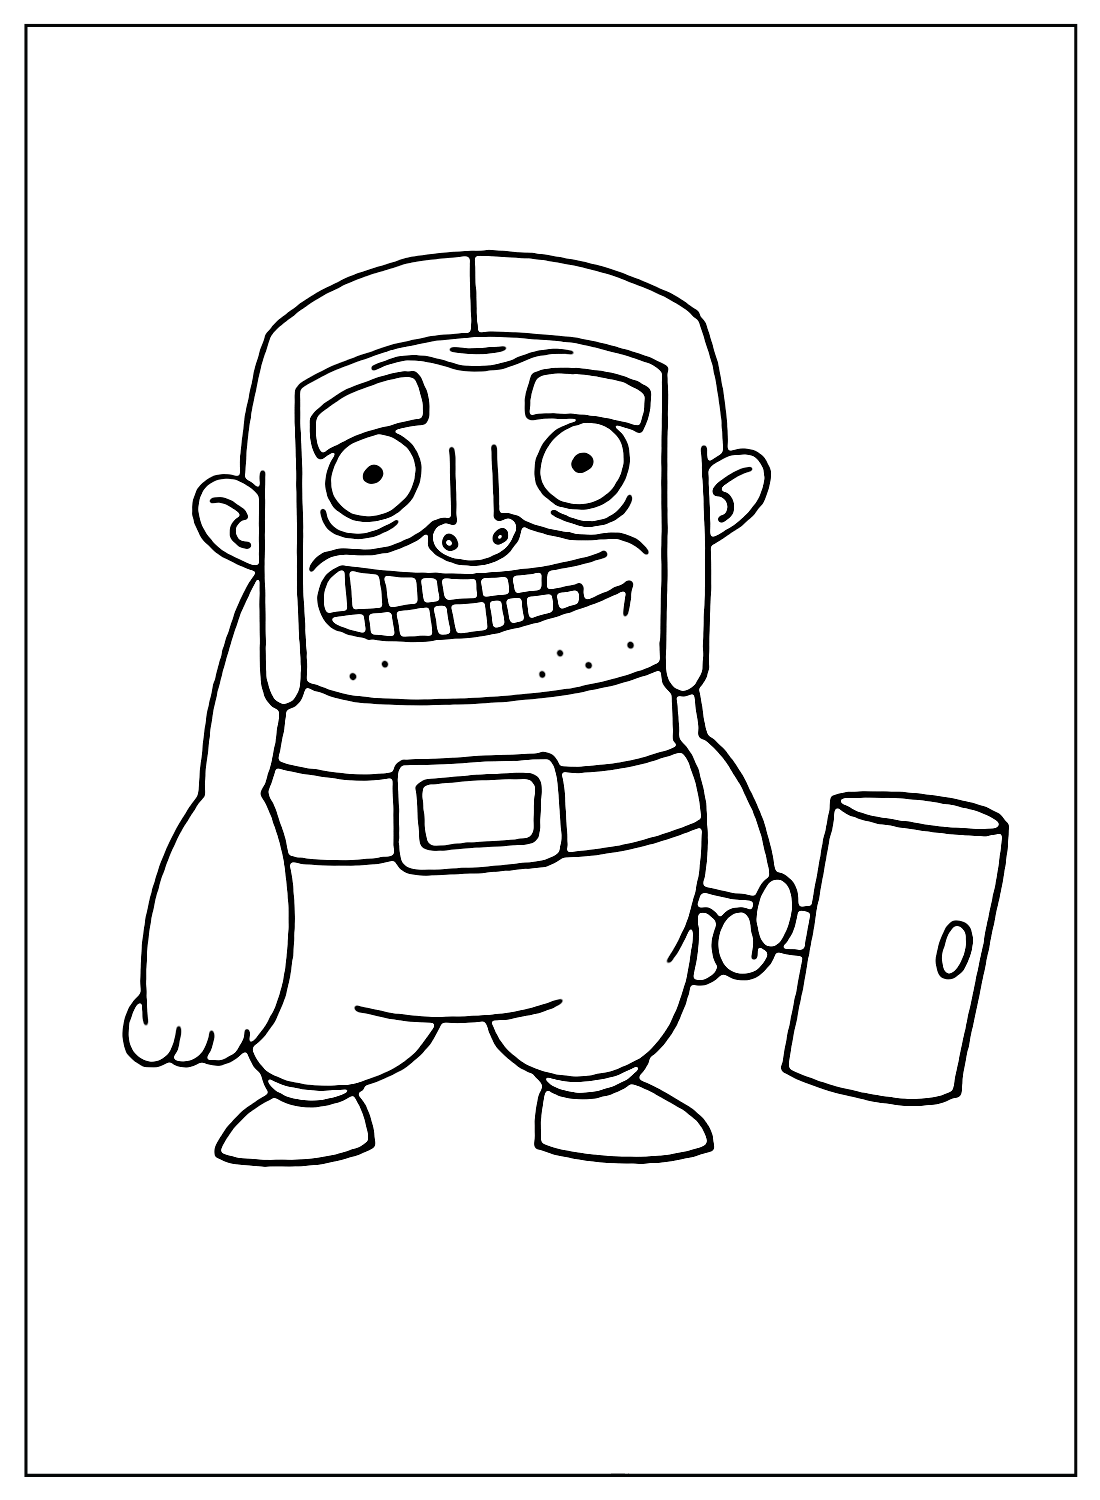 Clash of Clans Builder Coloring Pages from Clash of Clans